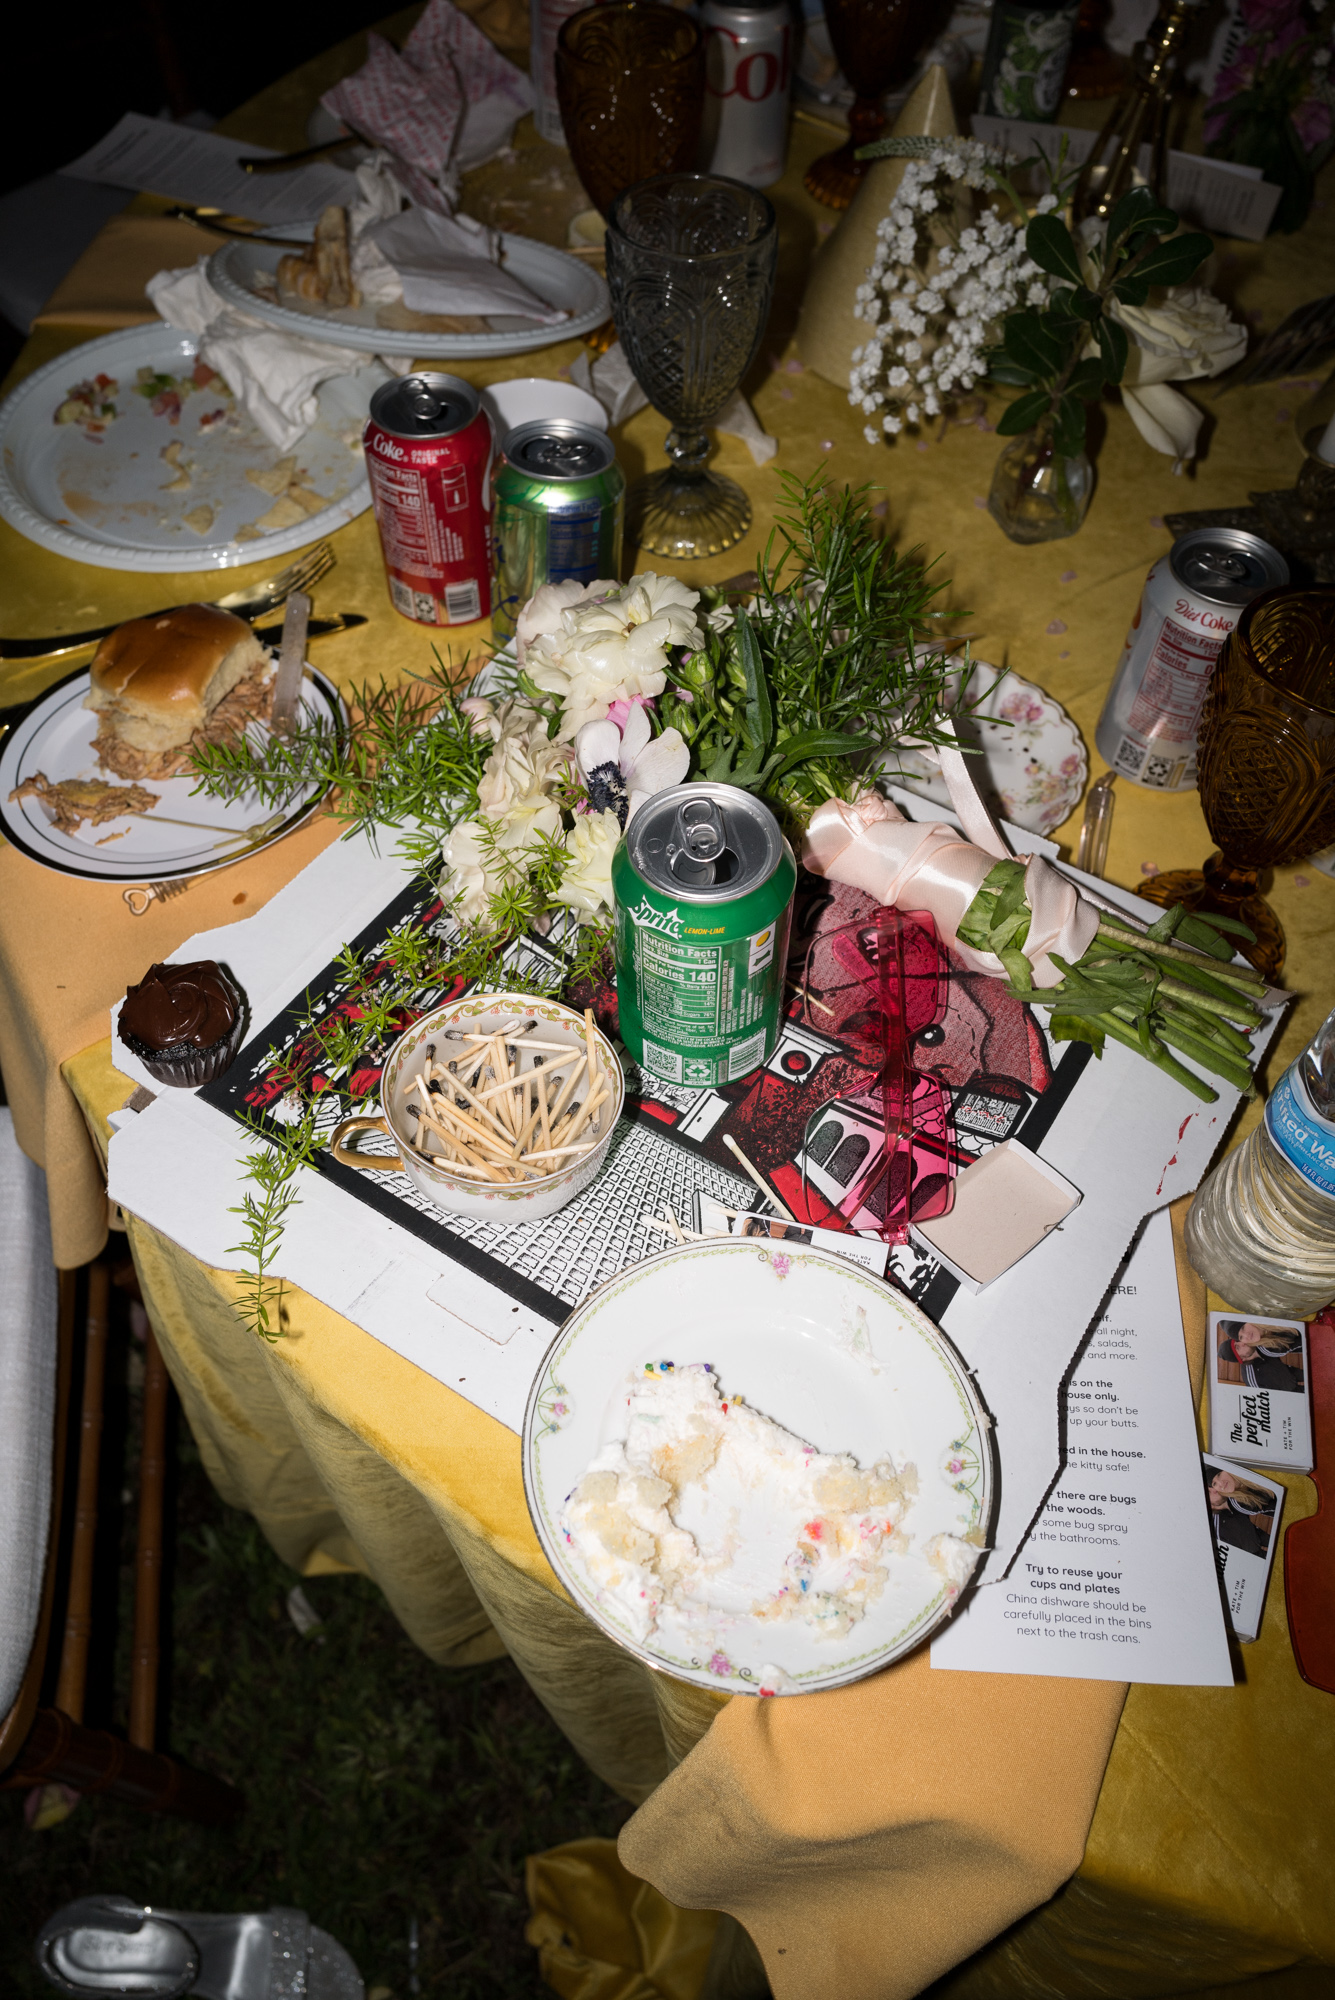 a messy, colorful tablecloth piled high with a pizza box, soda can and wedding bouquet at the end of an at home wedding reception in New Jersey